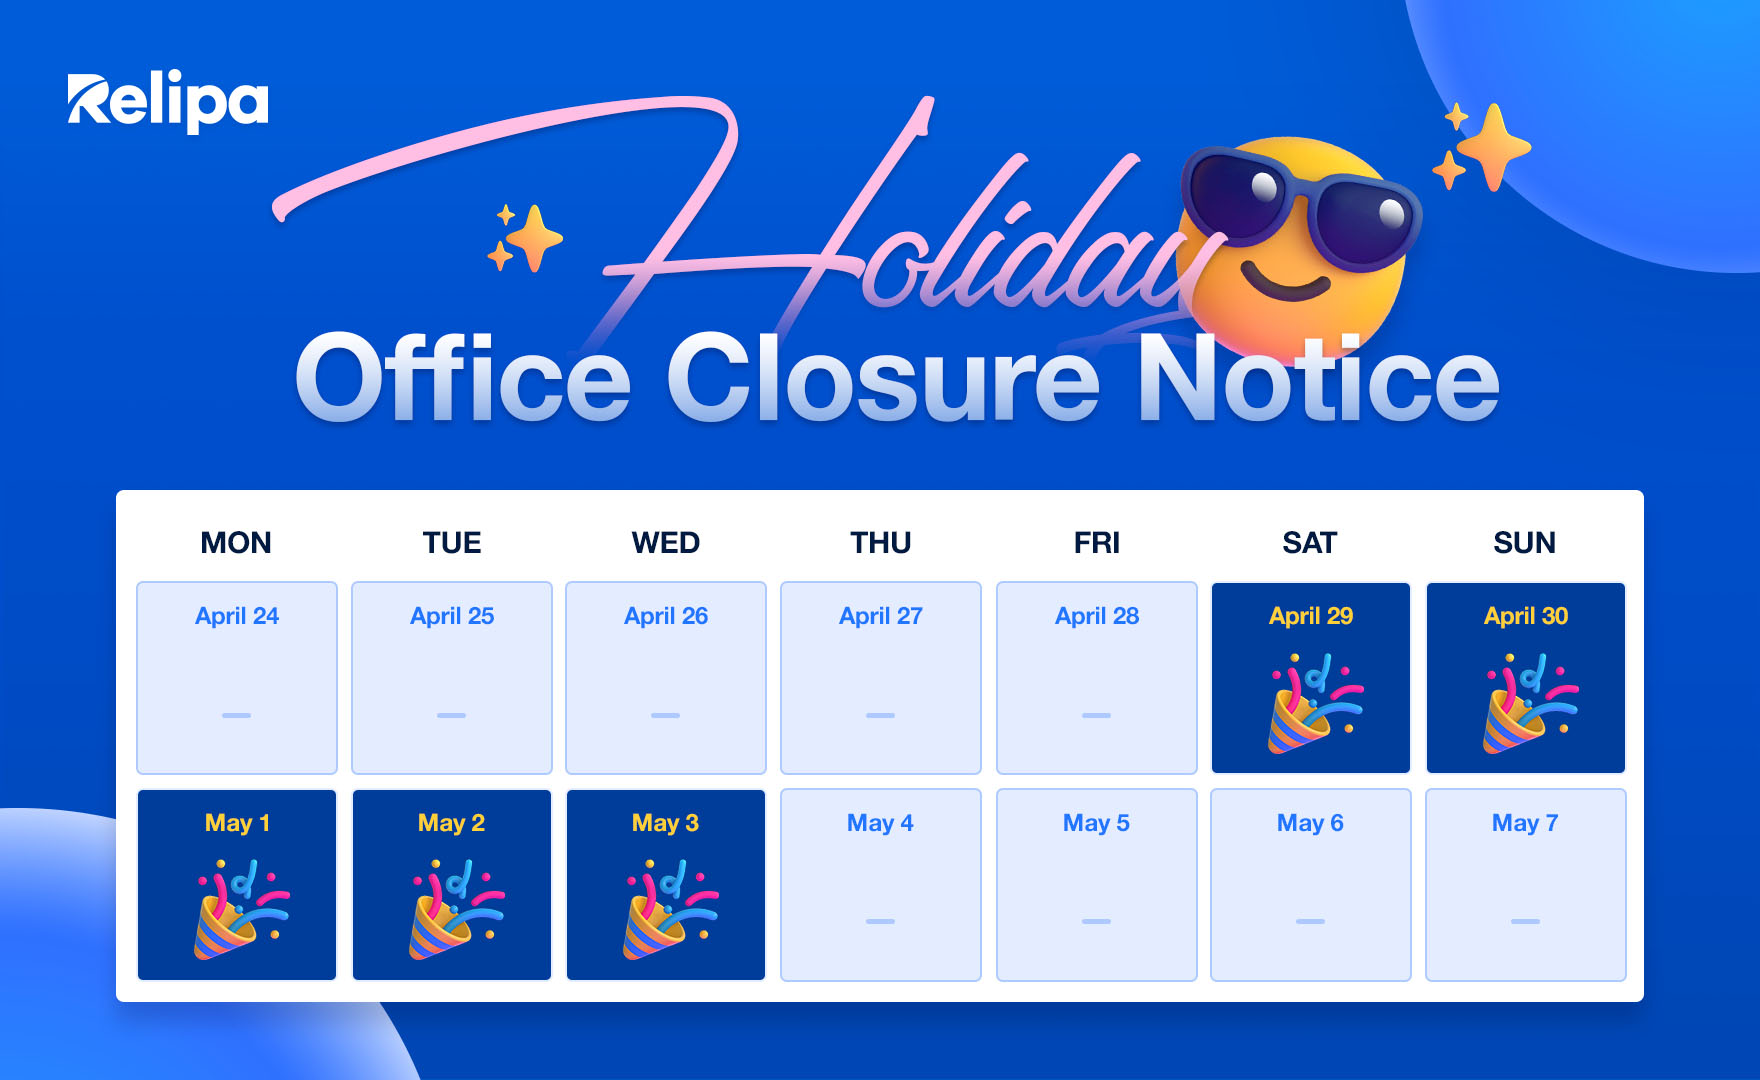 Holiday Office Closure Notice - Vietnam Independence Day & International Labor Day